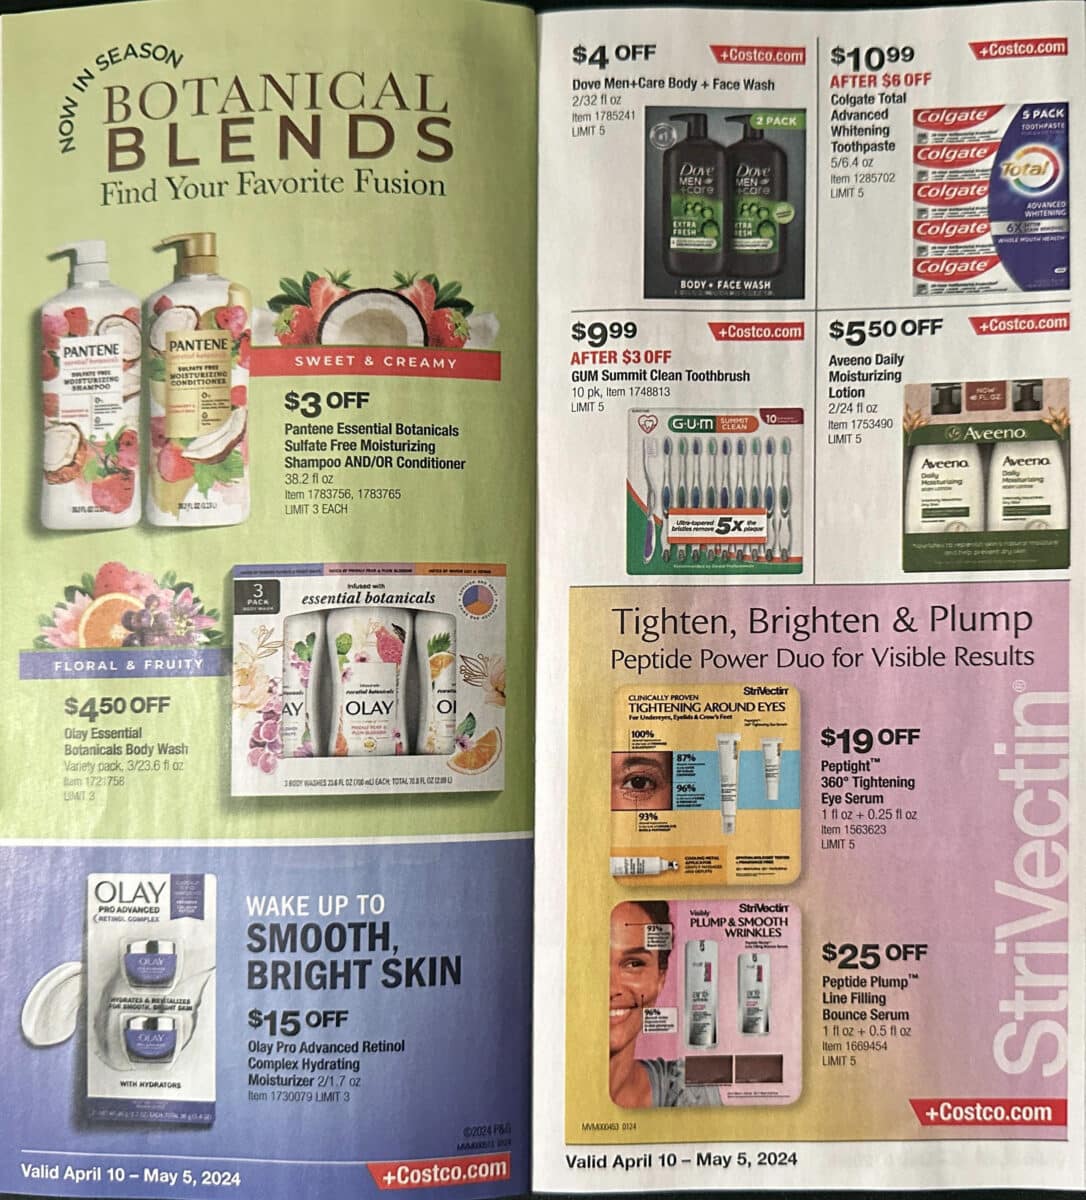 scan of the costco coupon savings book for april 2024